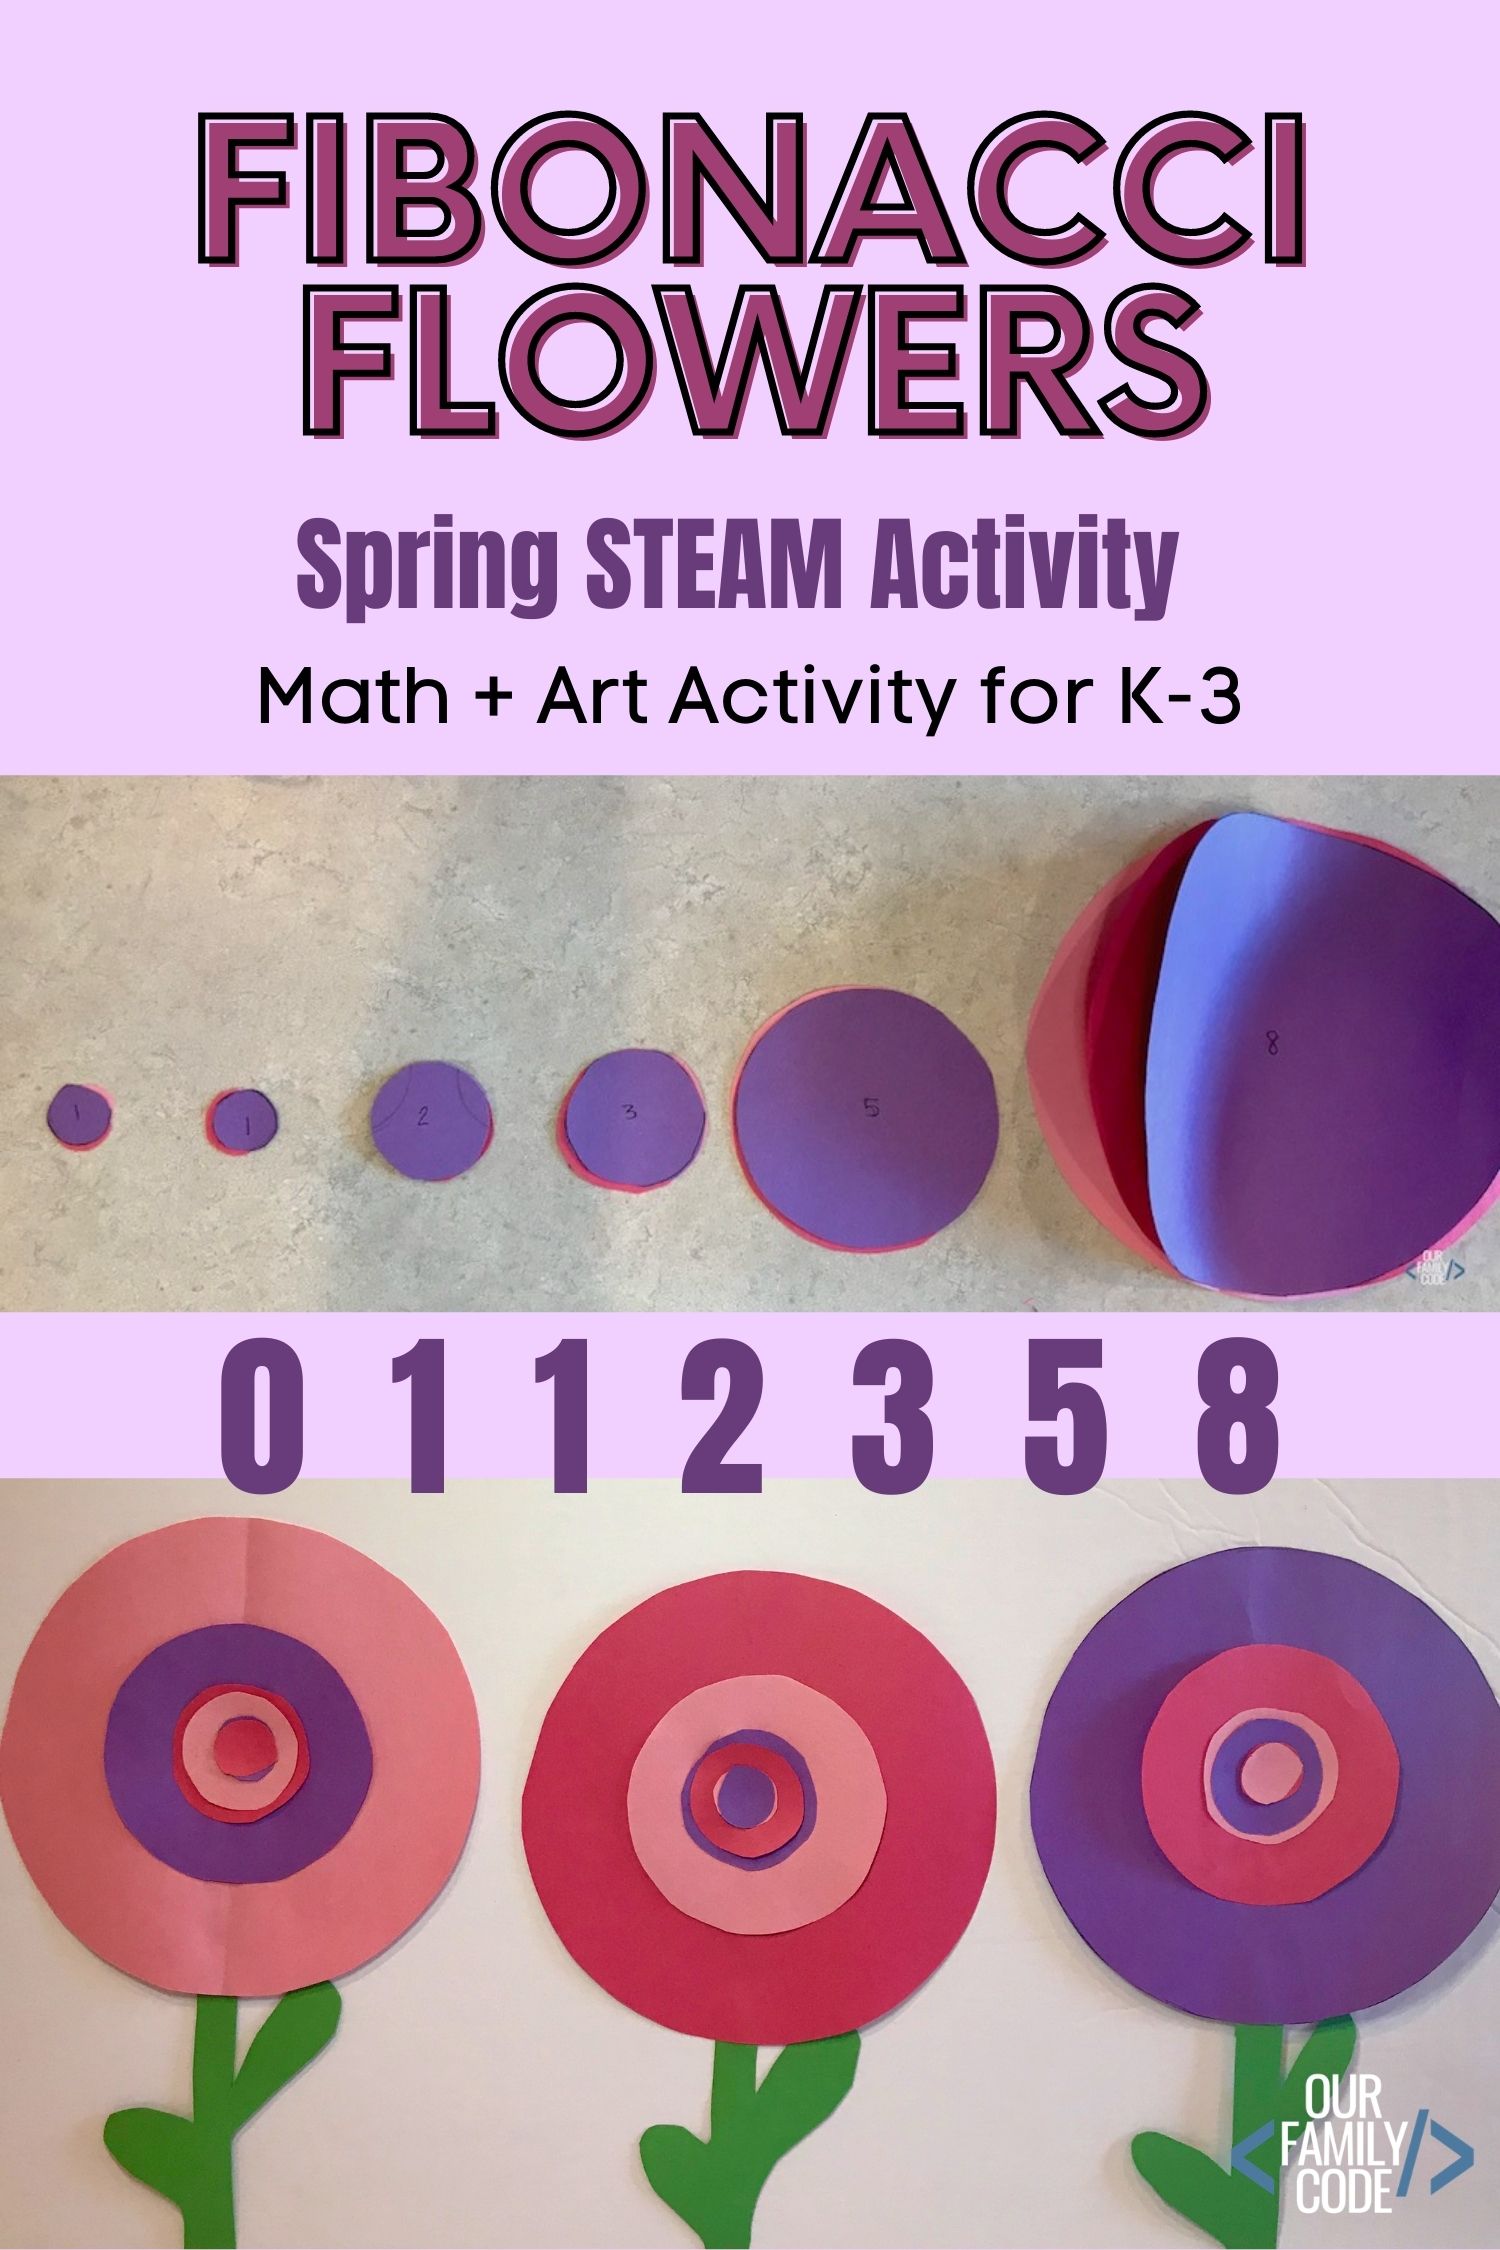 A picture of a Spring STEAM activity for kids with fibonacci sequence in purple text.